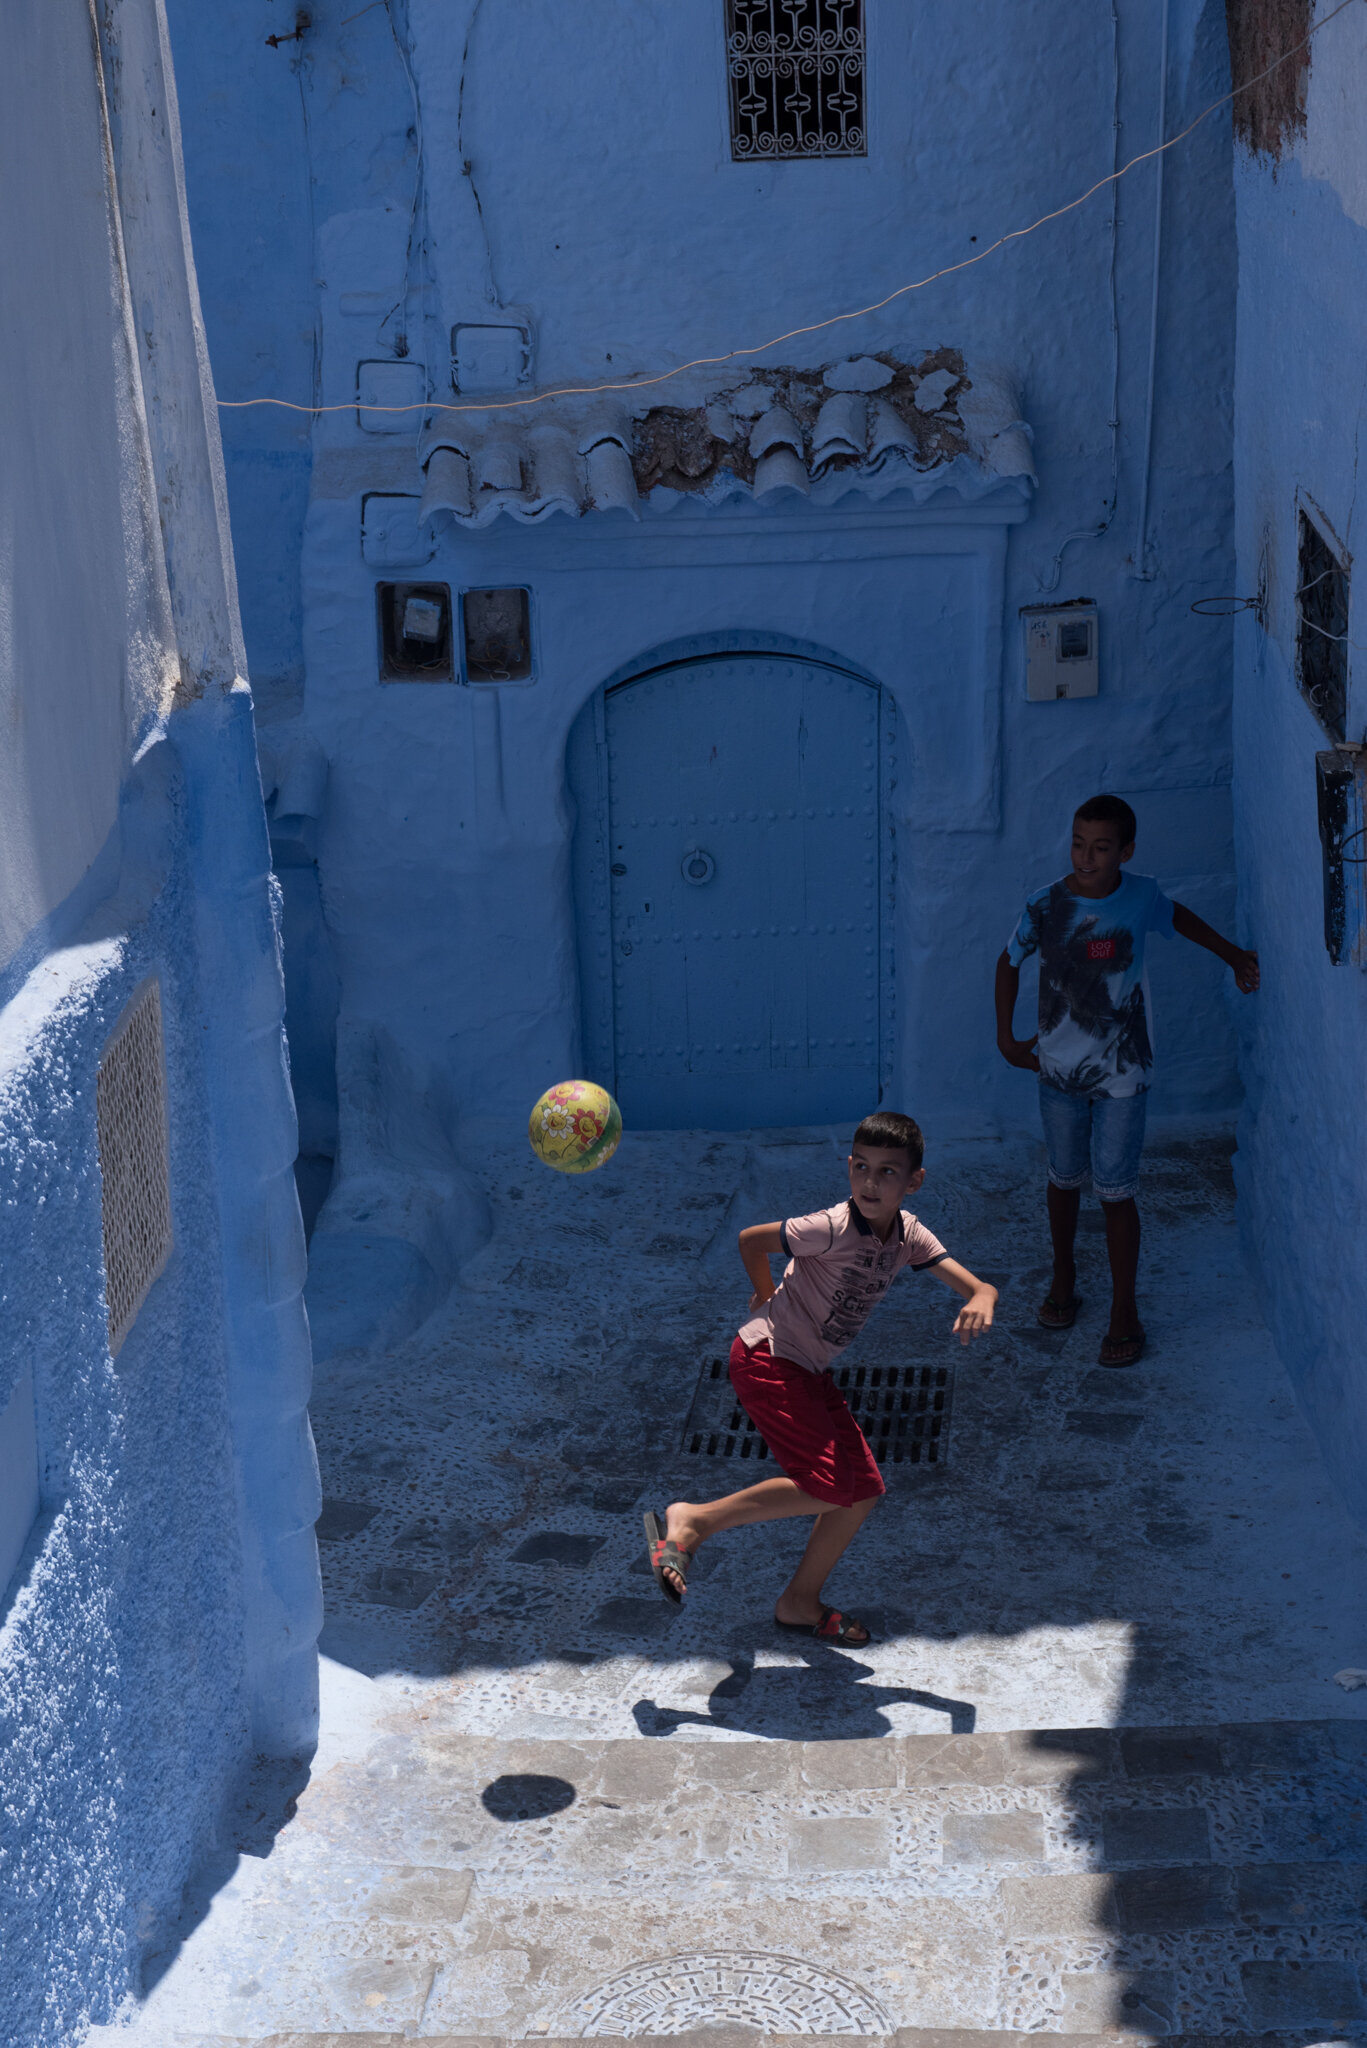    Morocco - Chefchaouen      Boys playing soccer in alleyway 